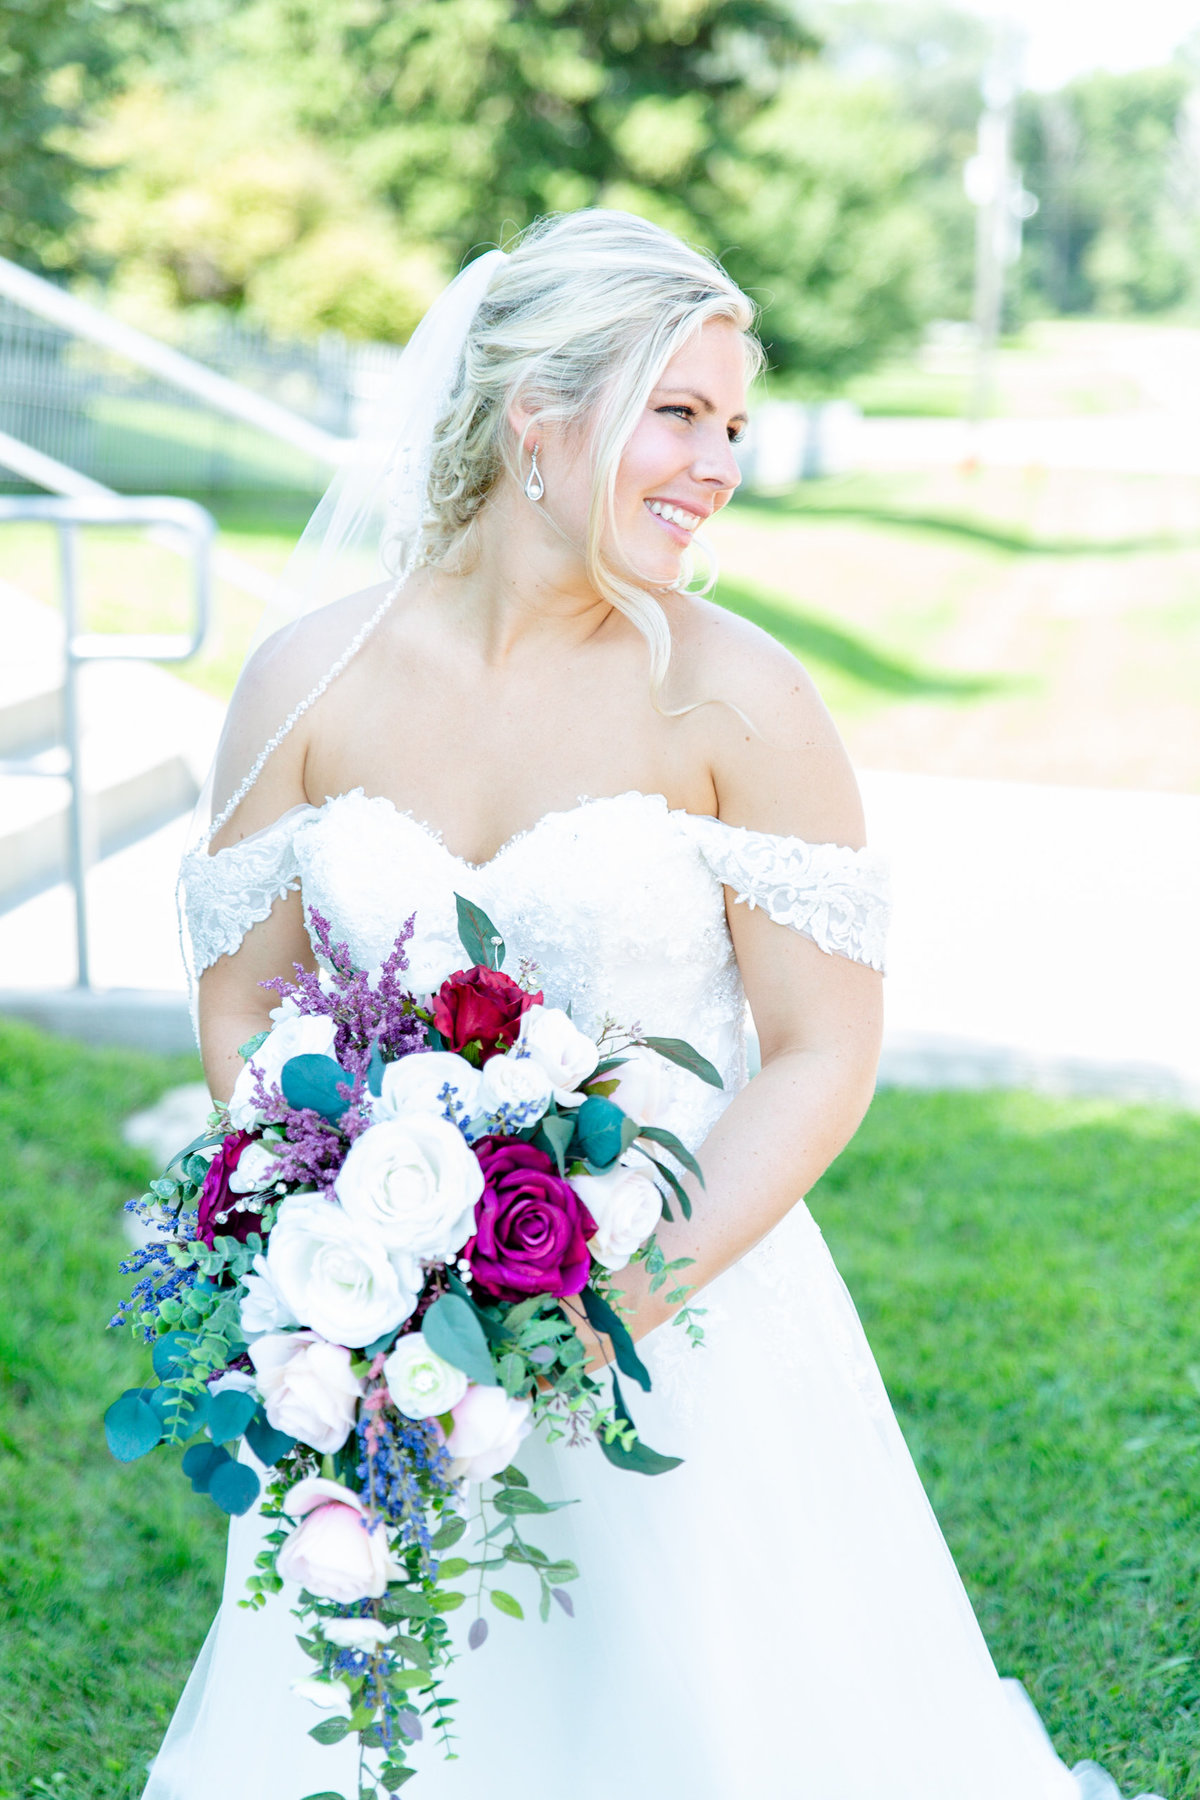 Beautiful bride with her bouquet of roses on her wedding day